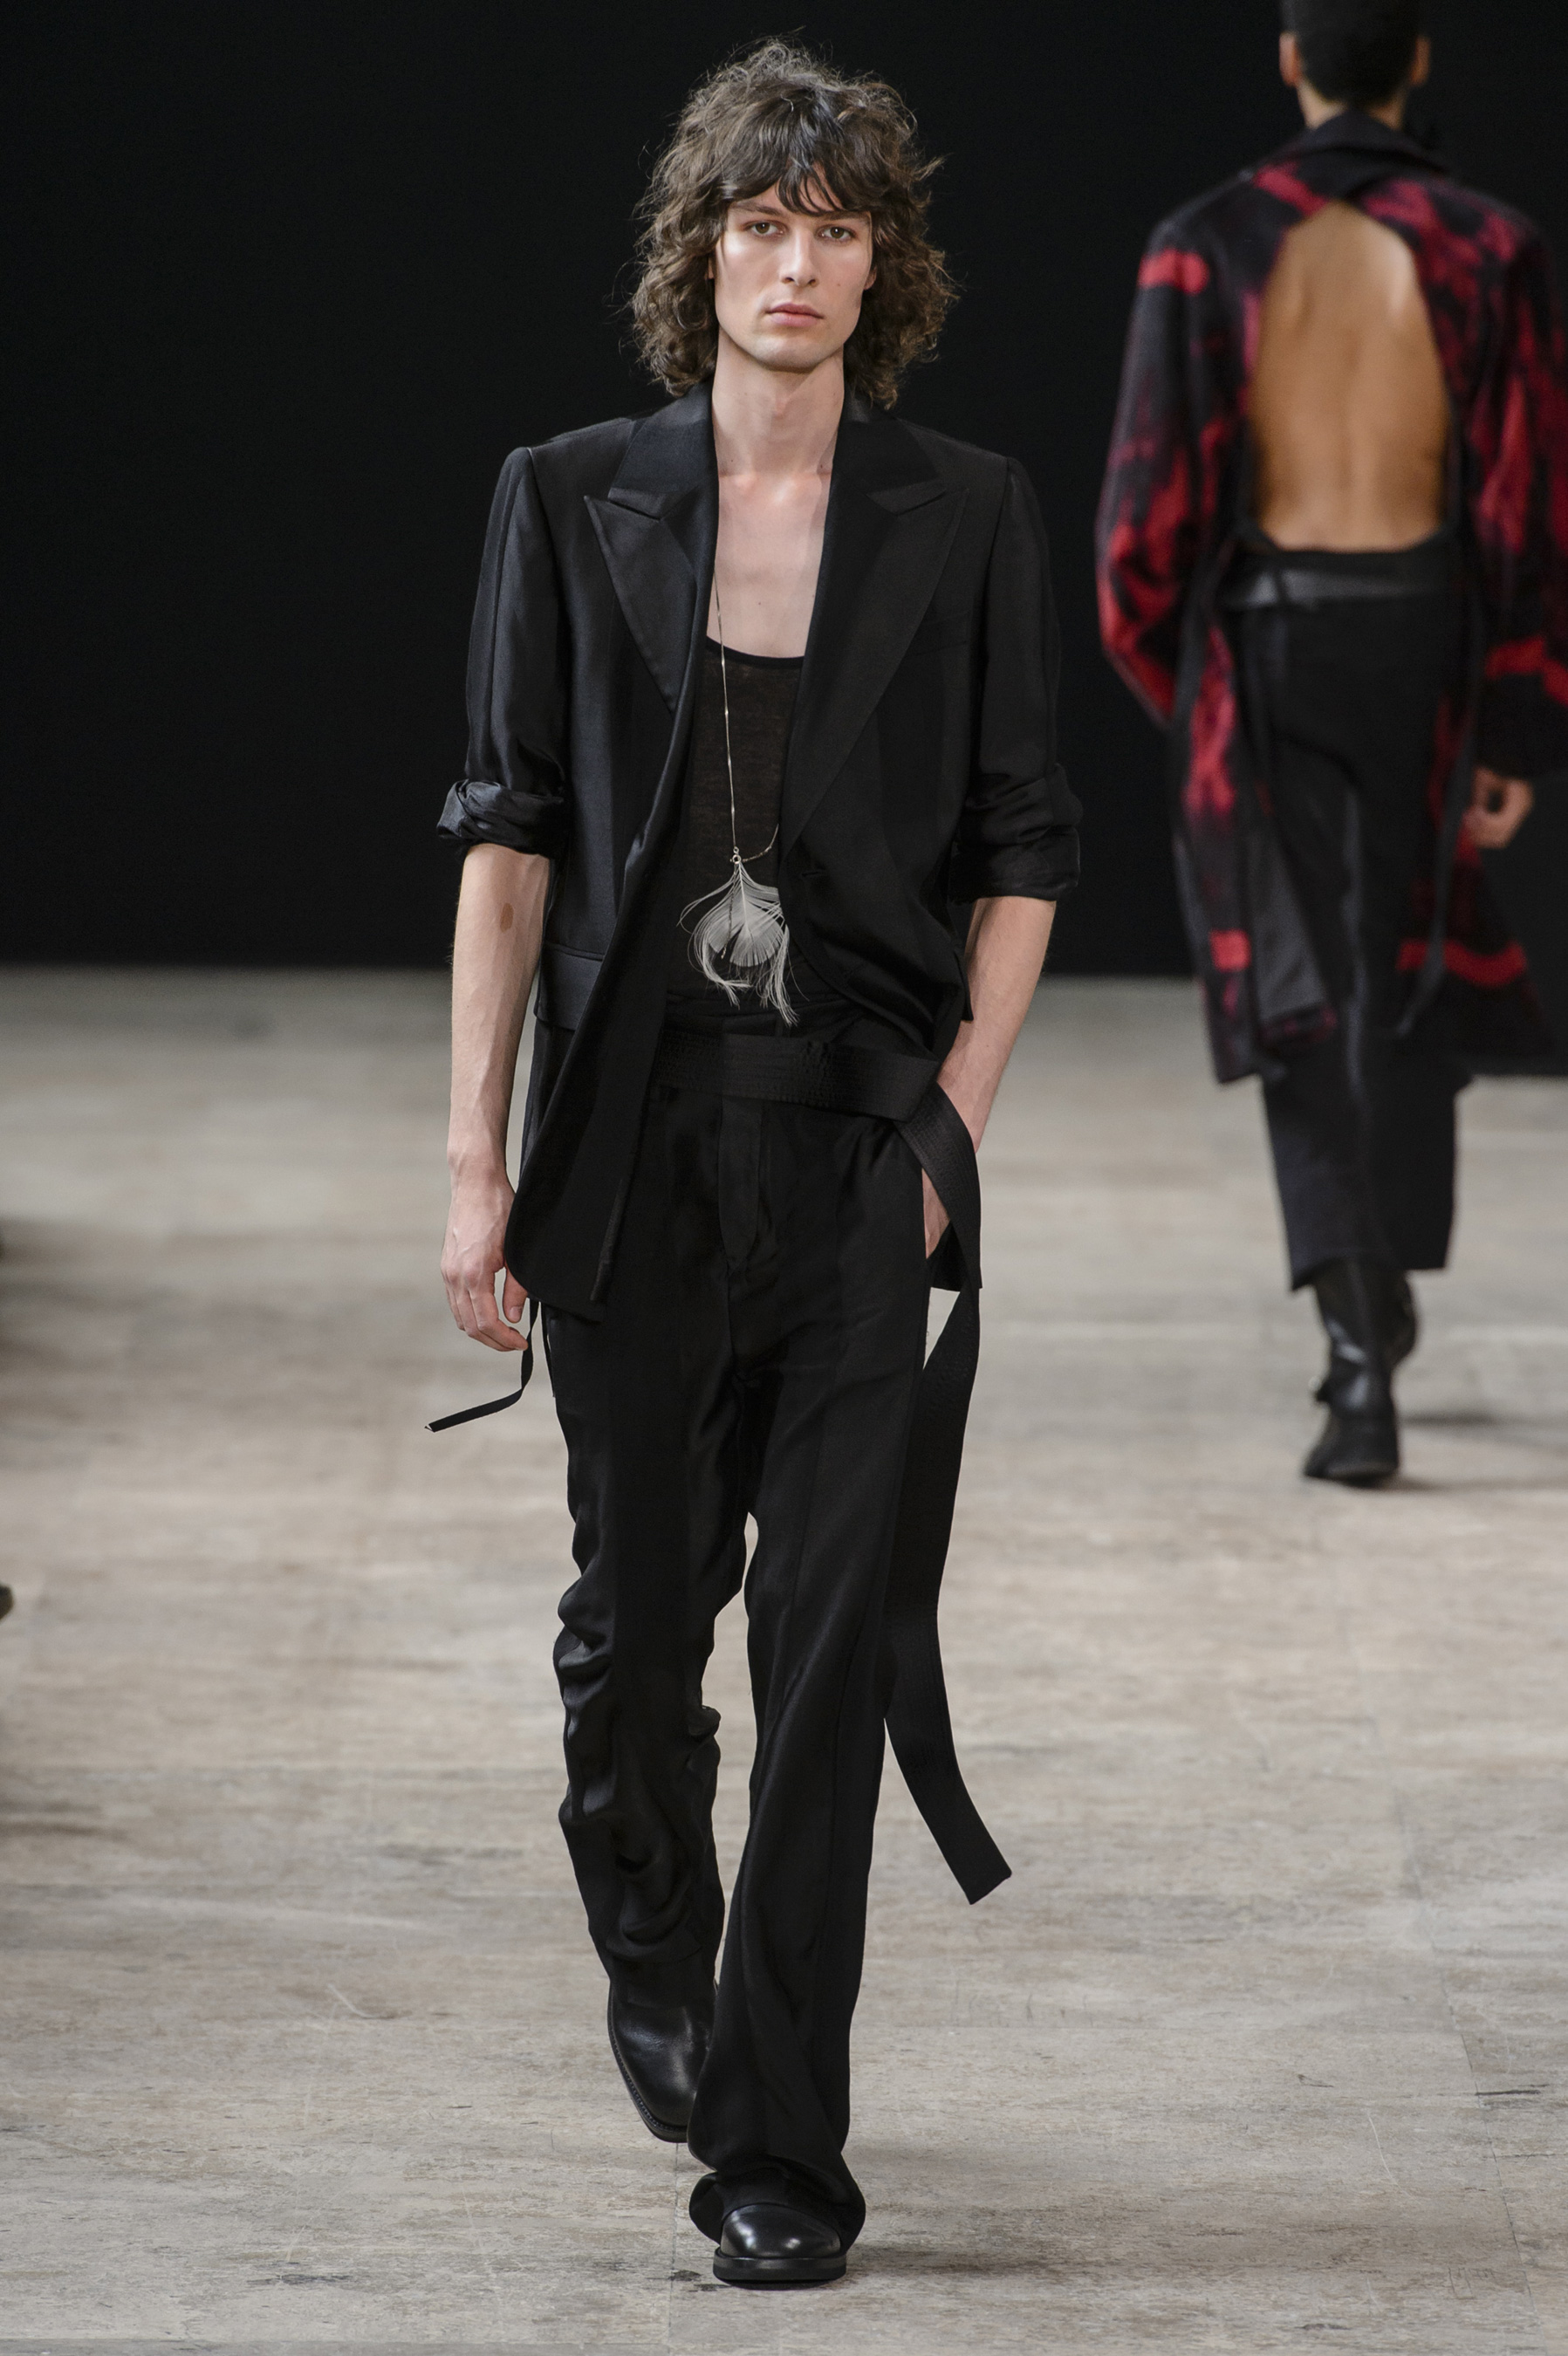 Ann Demeulemeester Spring 2018 Men's Fashion Show - The Impression